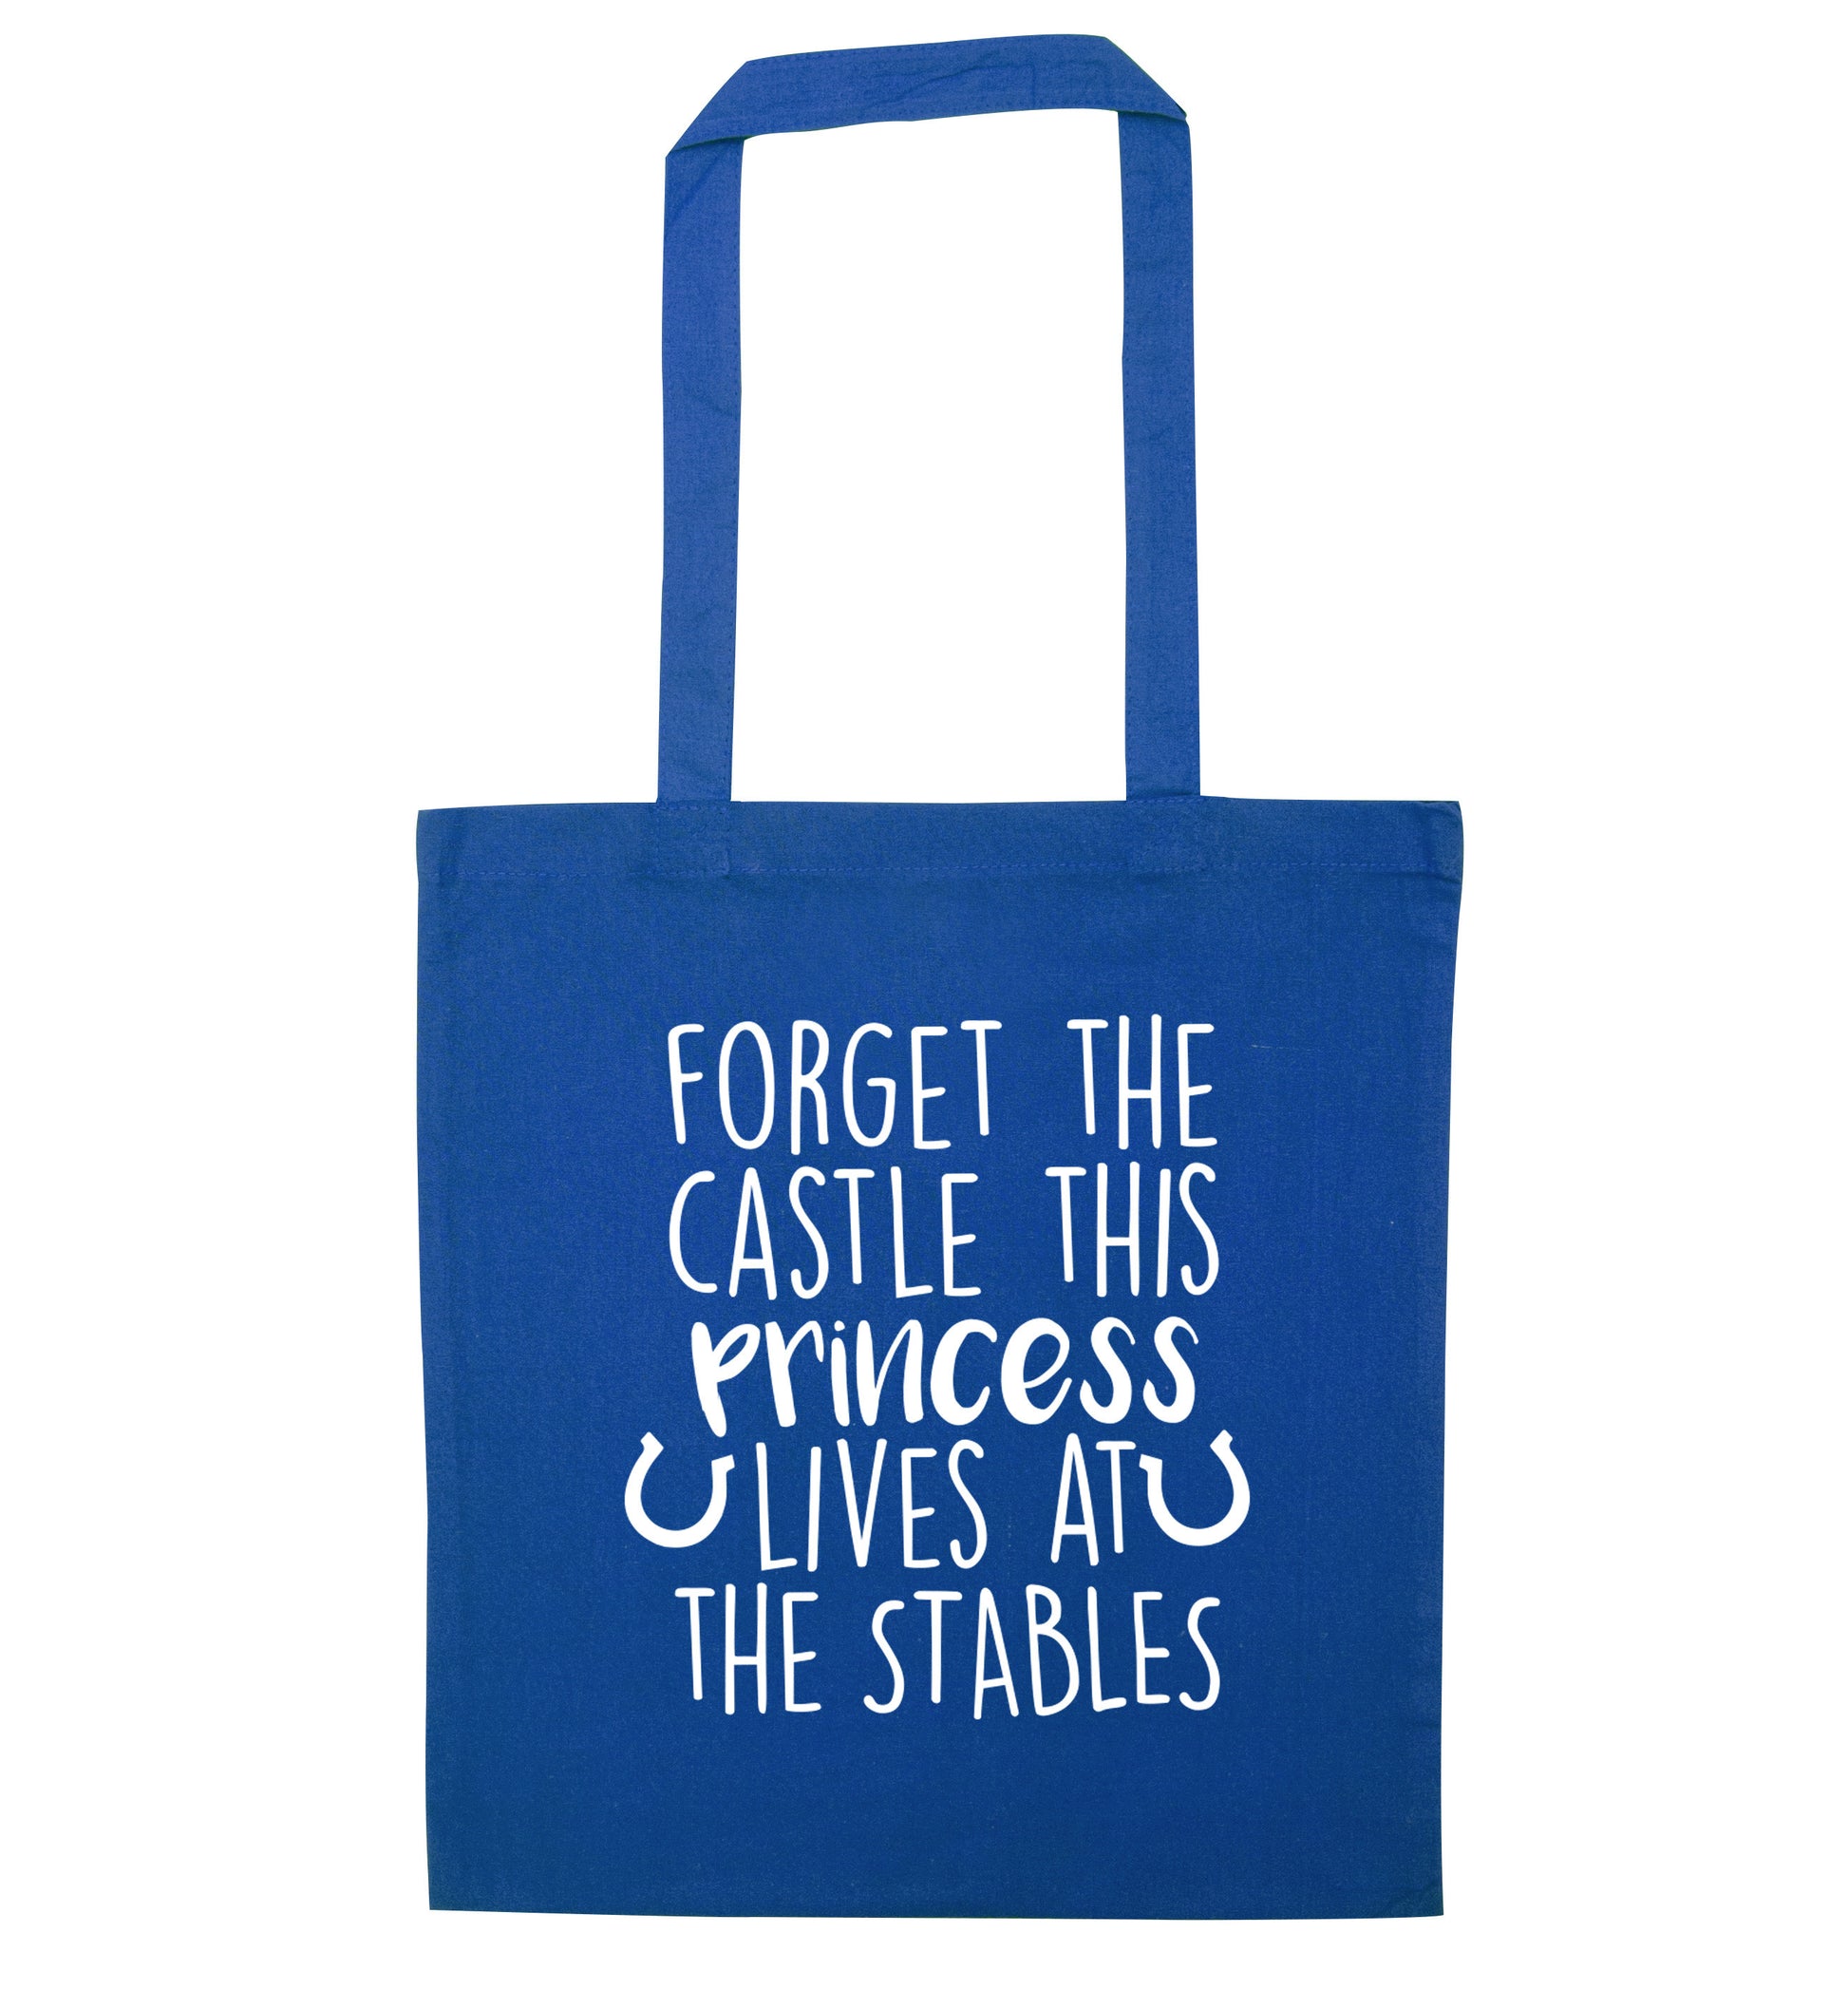 Forget the castle this princess lives at the stables blue tote bag